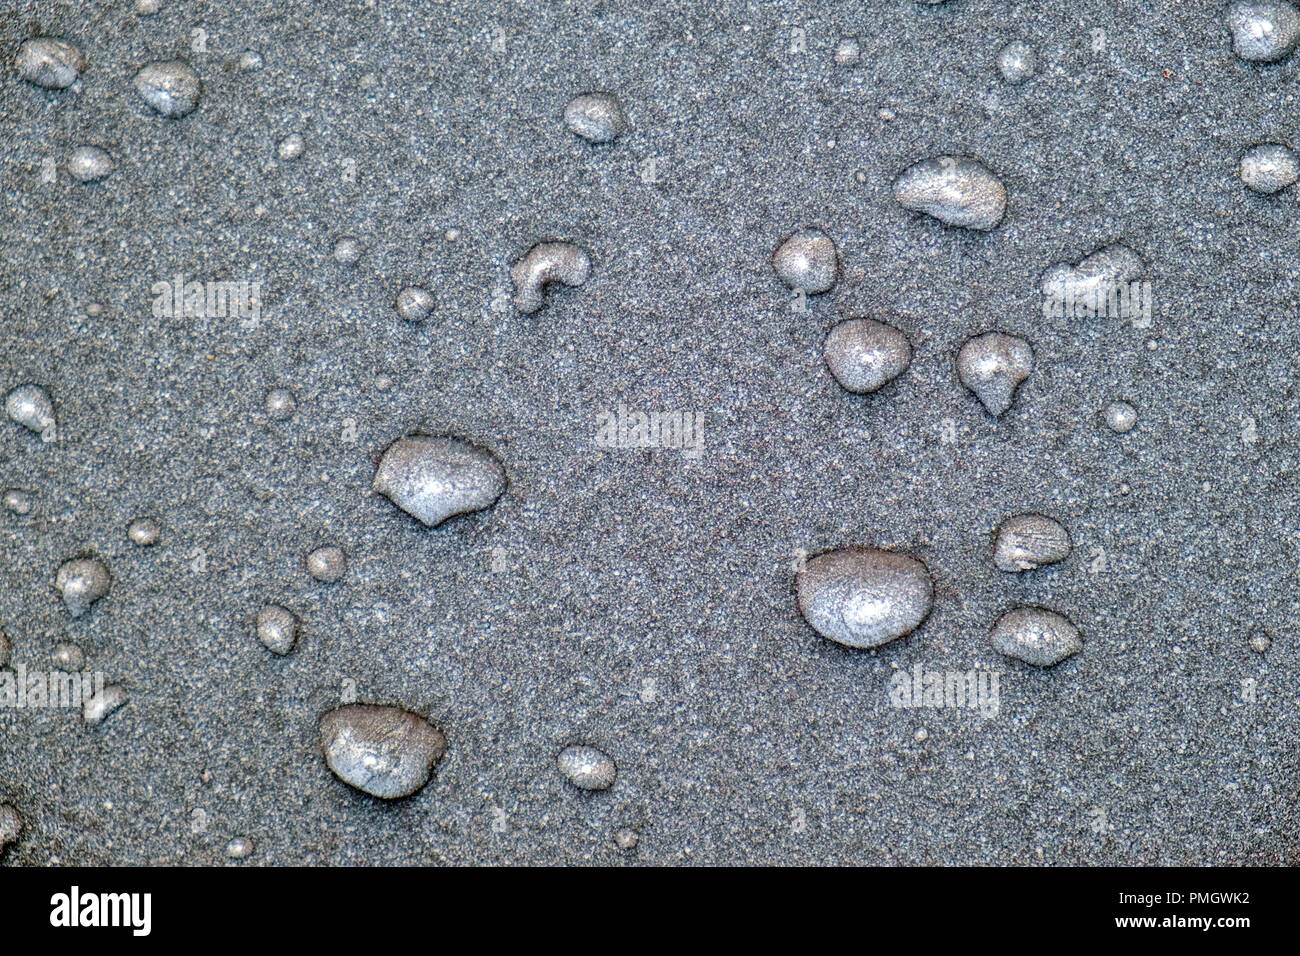 Overnight frost and frozen rain on a car bonnet. Full frame background texture. Stock Photo